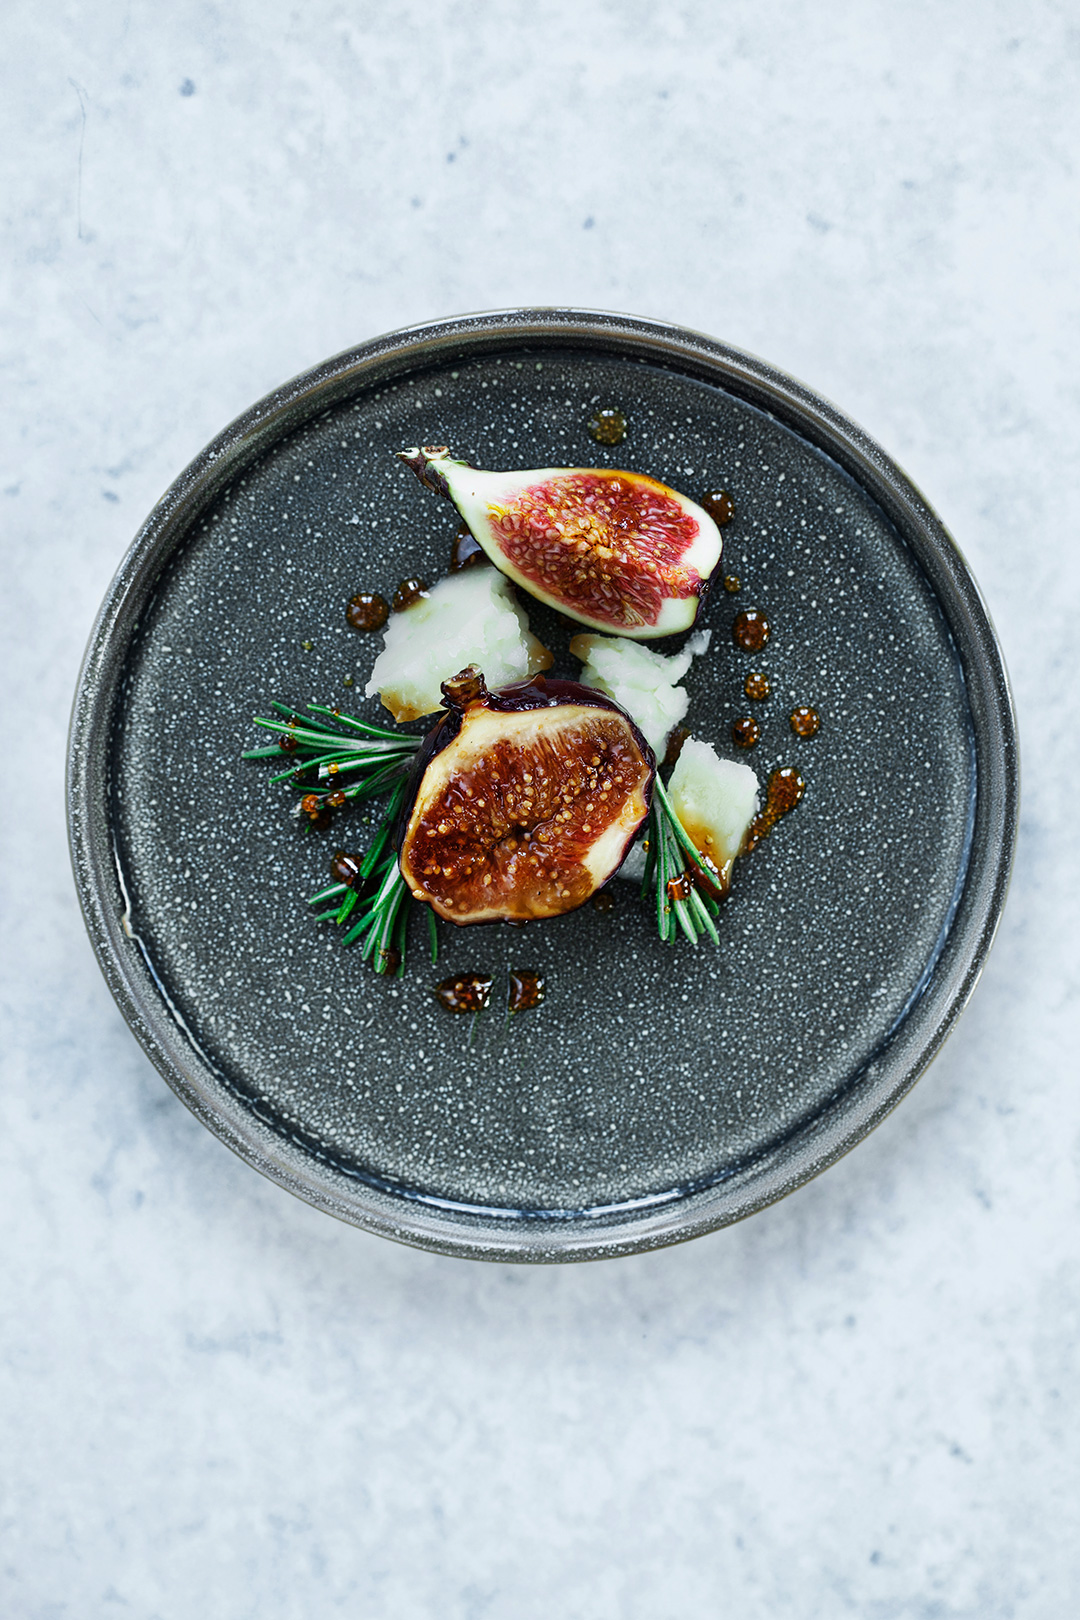 Braised Figs Recipe with Rosemary and Honey. #recipe